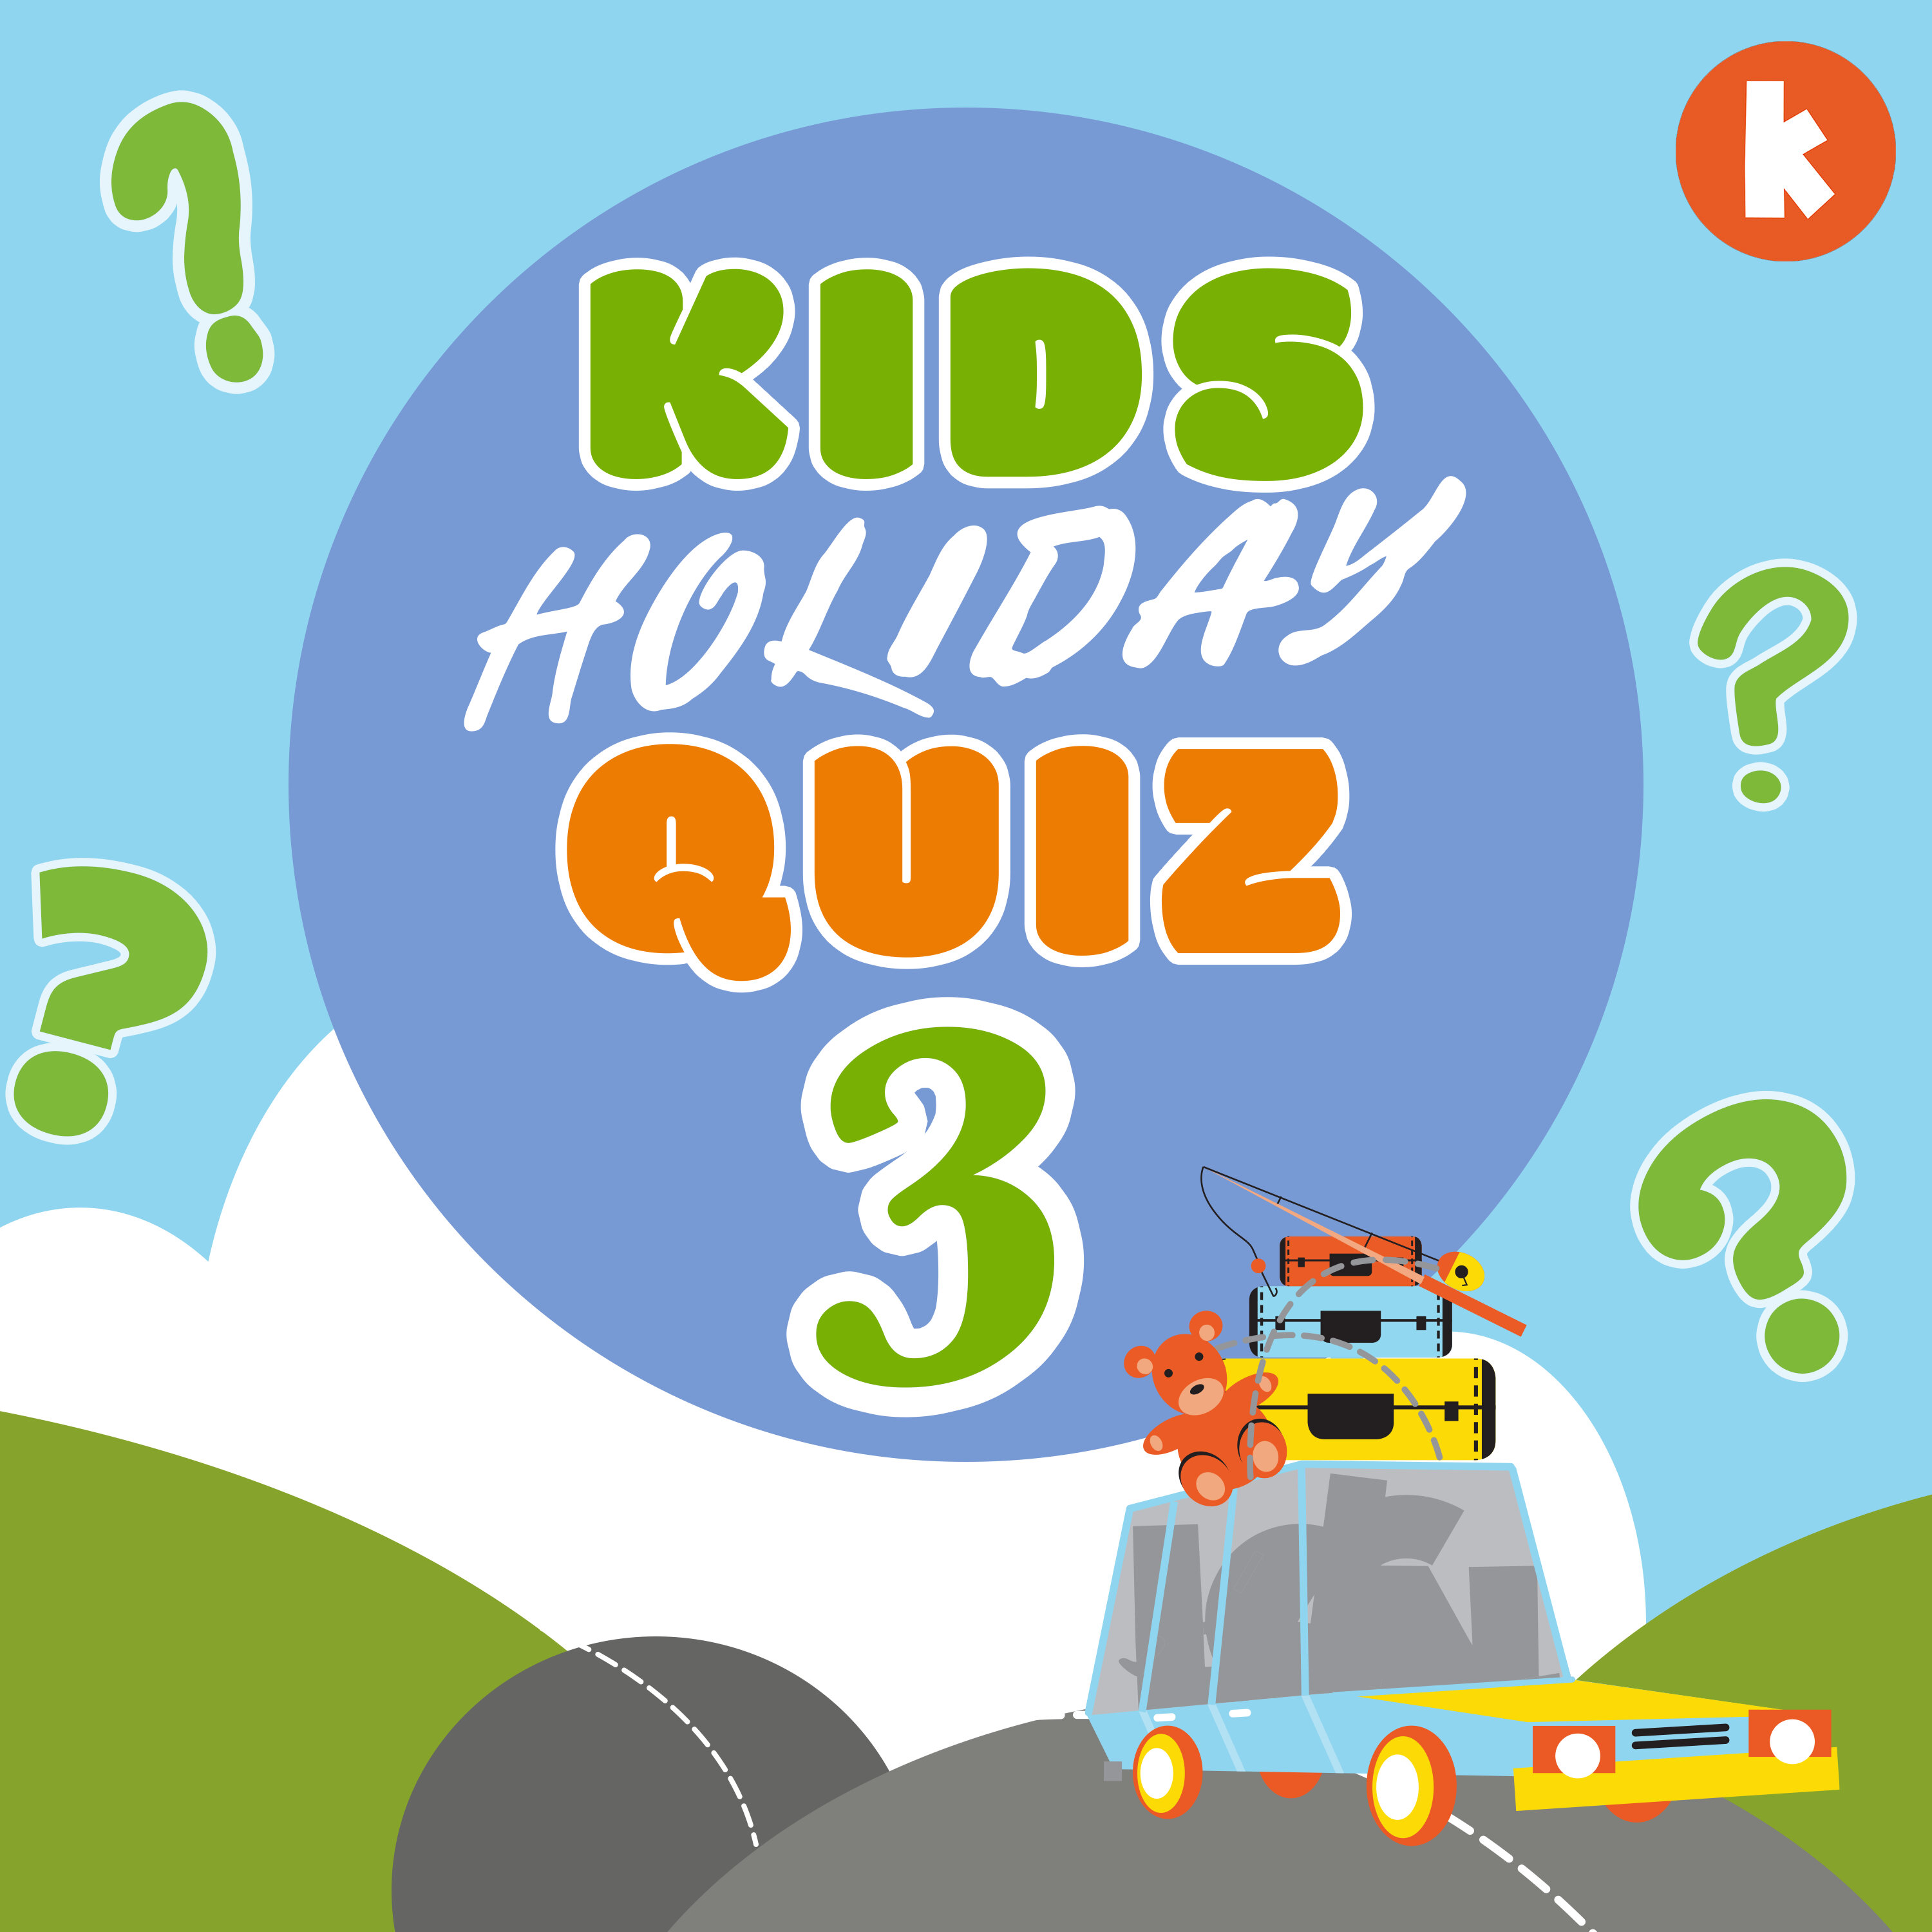 The Kids Holiday Quiz 3